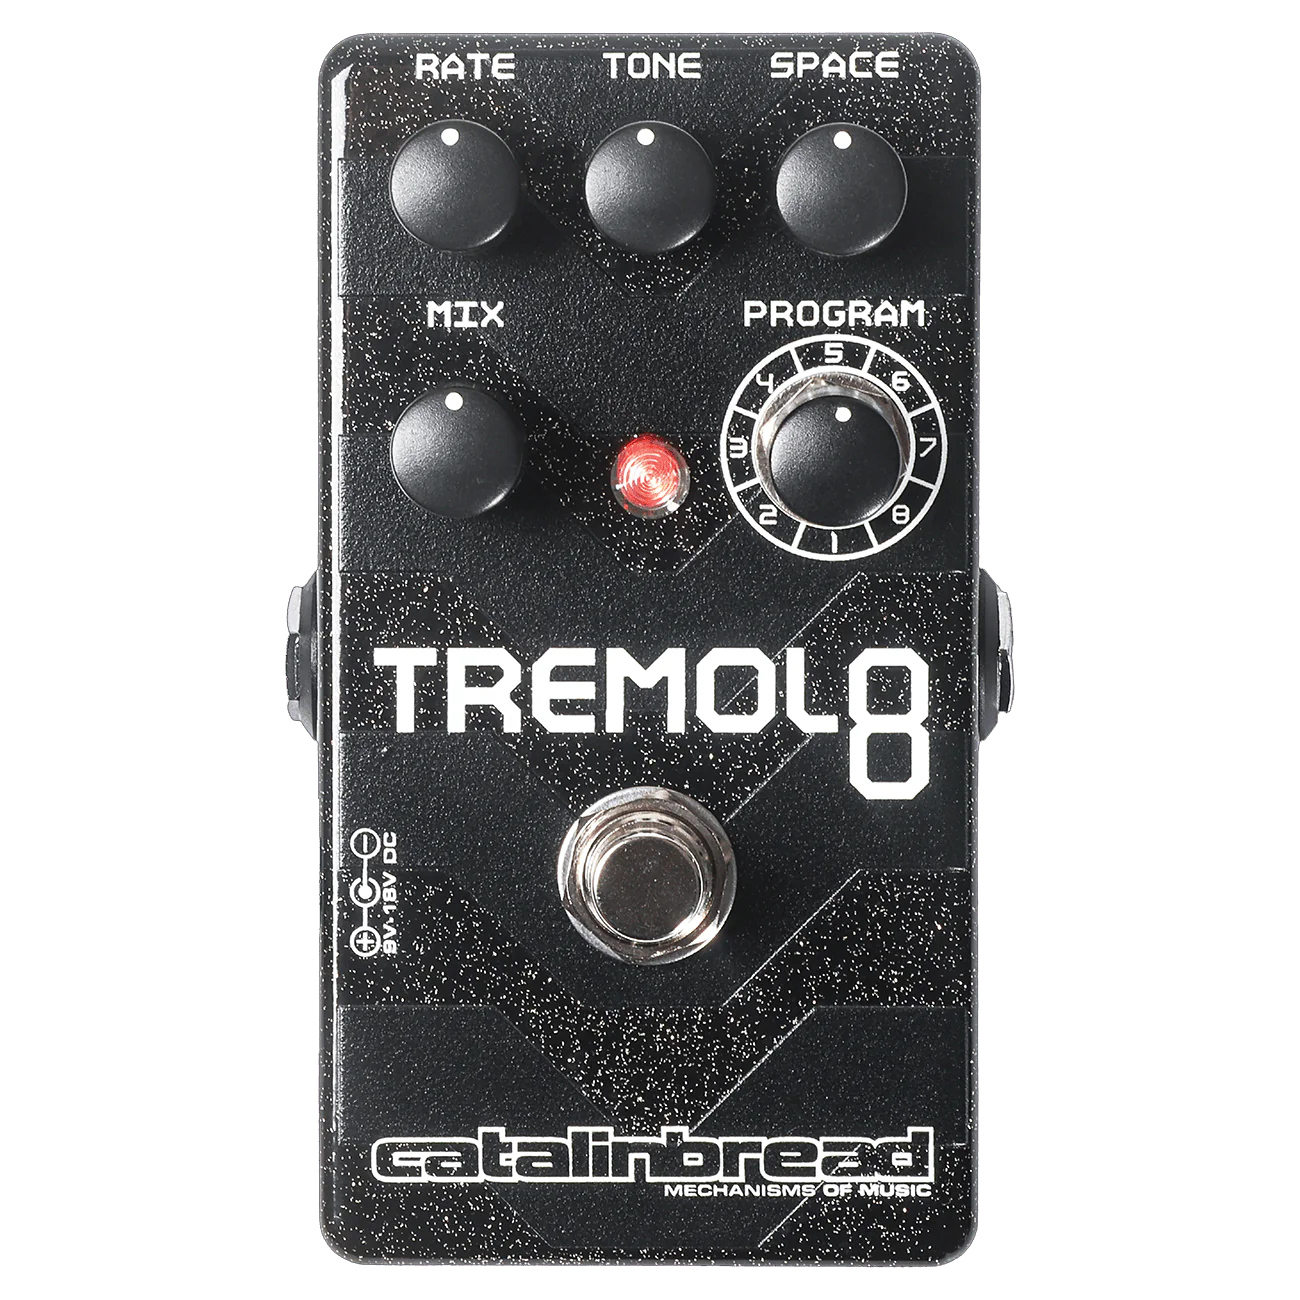 Top down of Catalinbread Tremelo 8.